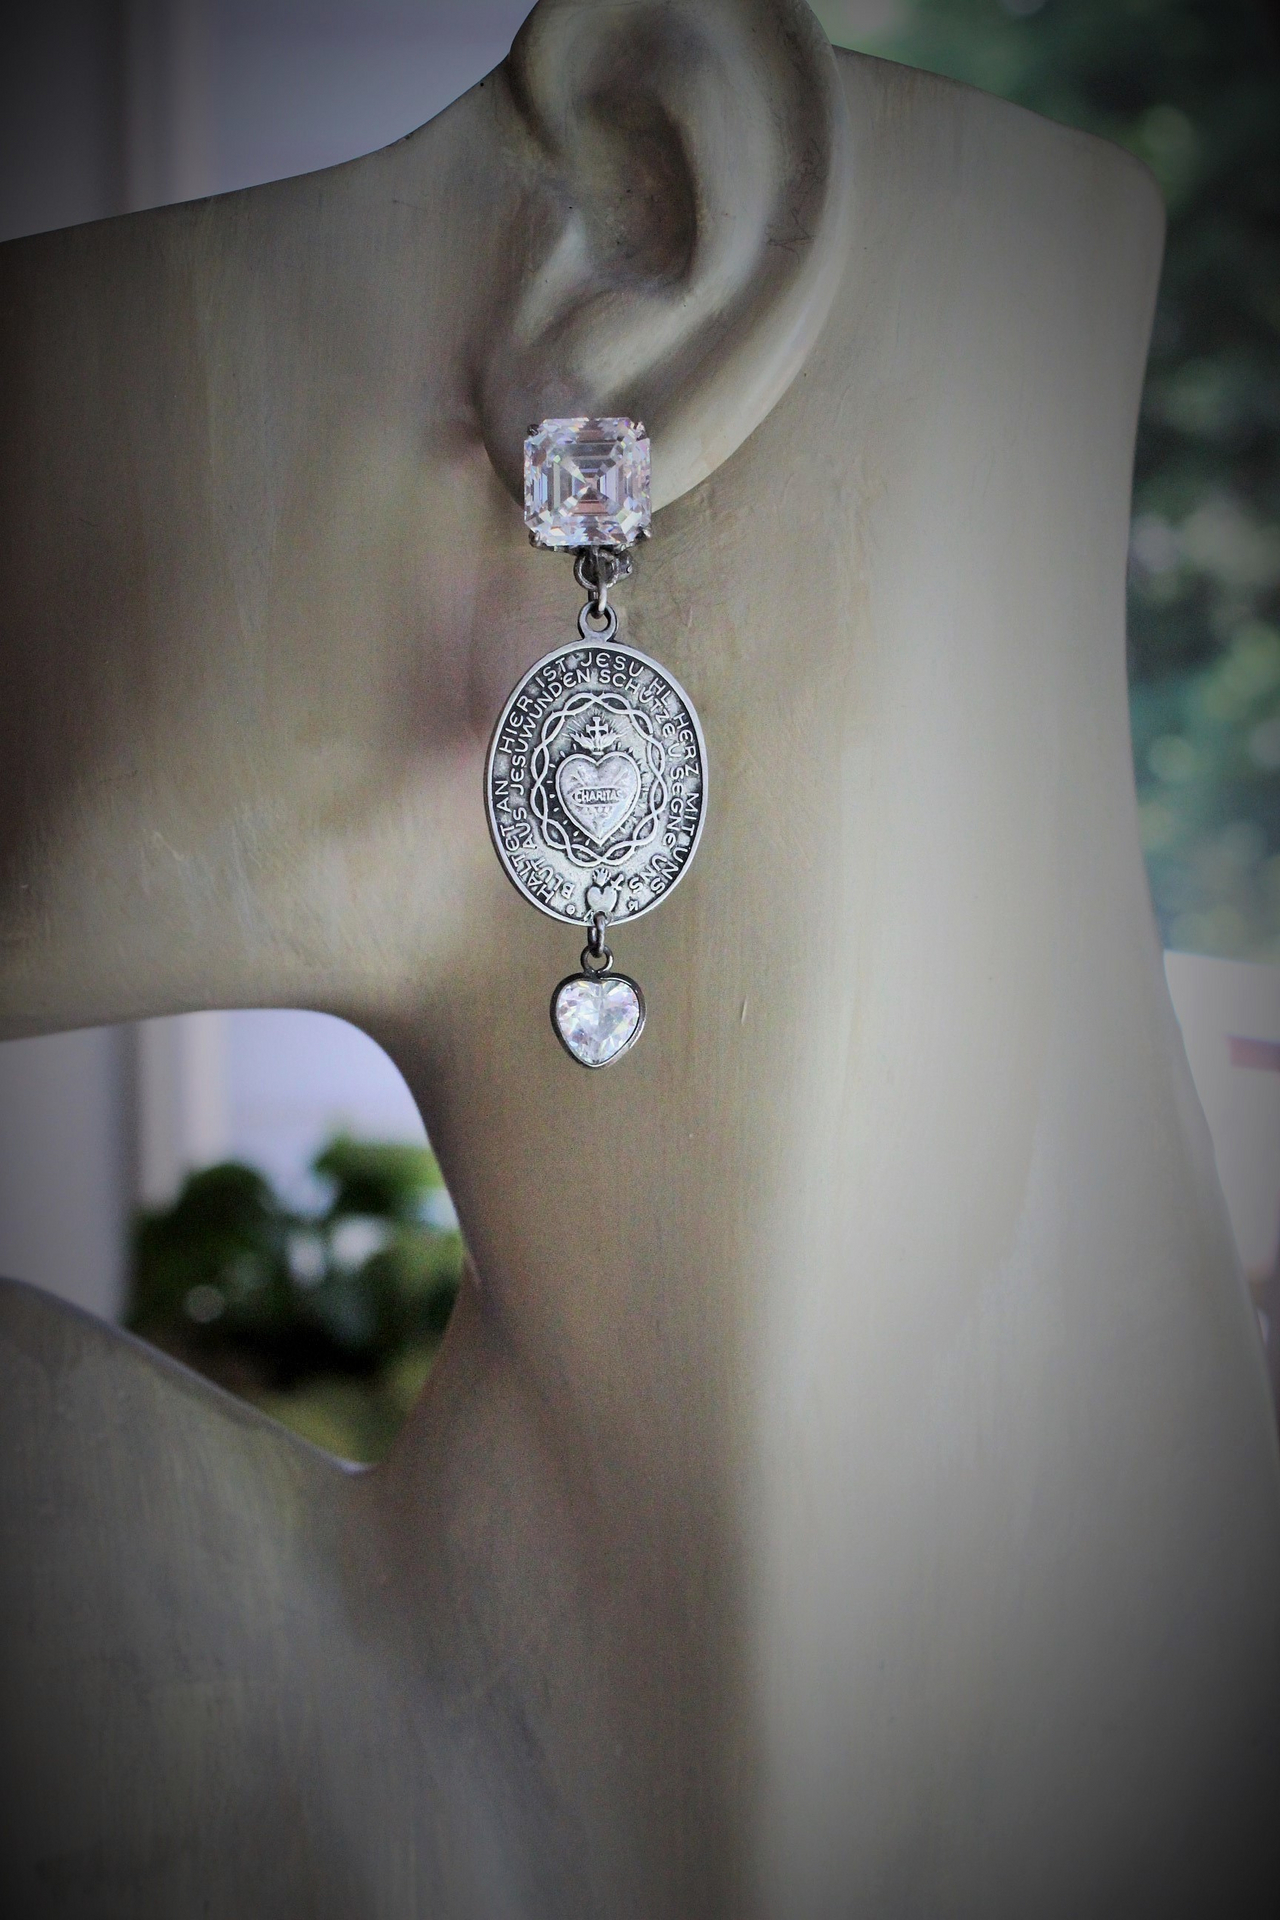 Bless Us Earrings with Intricate Matching Sacred Heart German Medals,Vintage Sterling Asscher Cut Earrings,Vintage Sterling Faceted Crystal Hearts